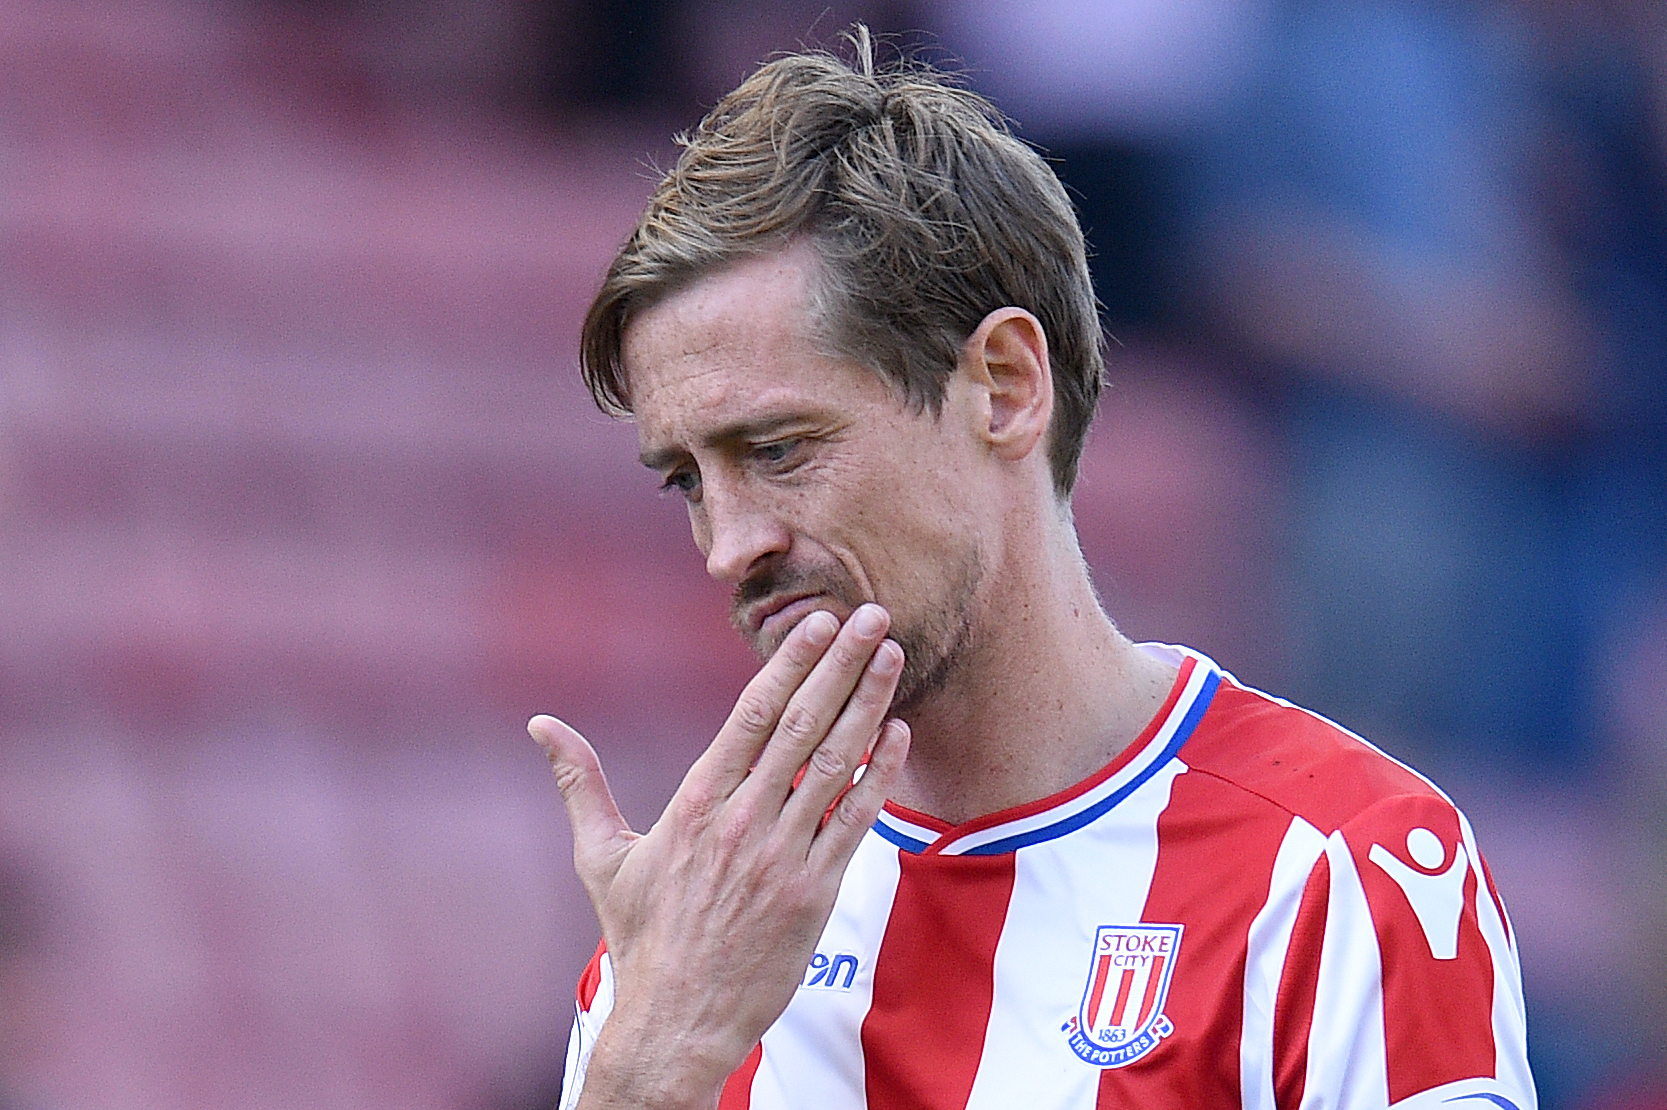 Peter Crouch during his playing days at Stoke City, a team he joined in 2011 after leaving Tottenham Hotspur.